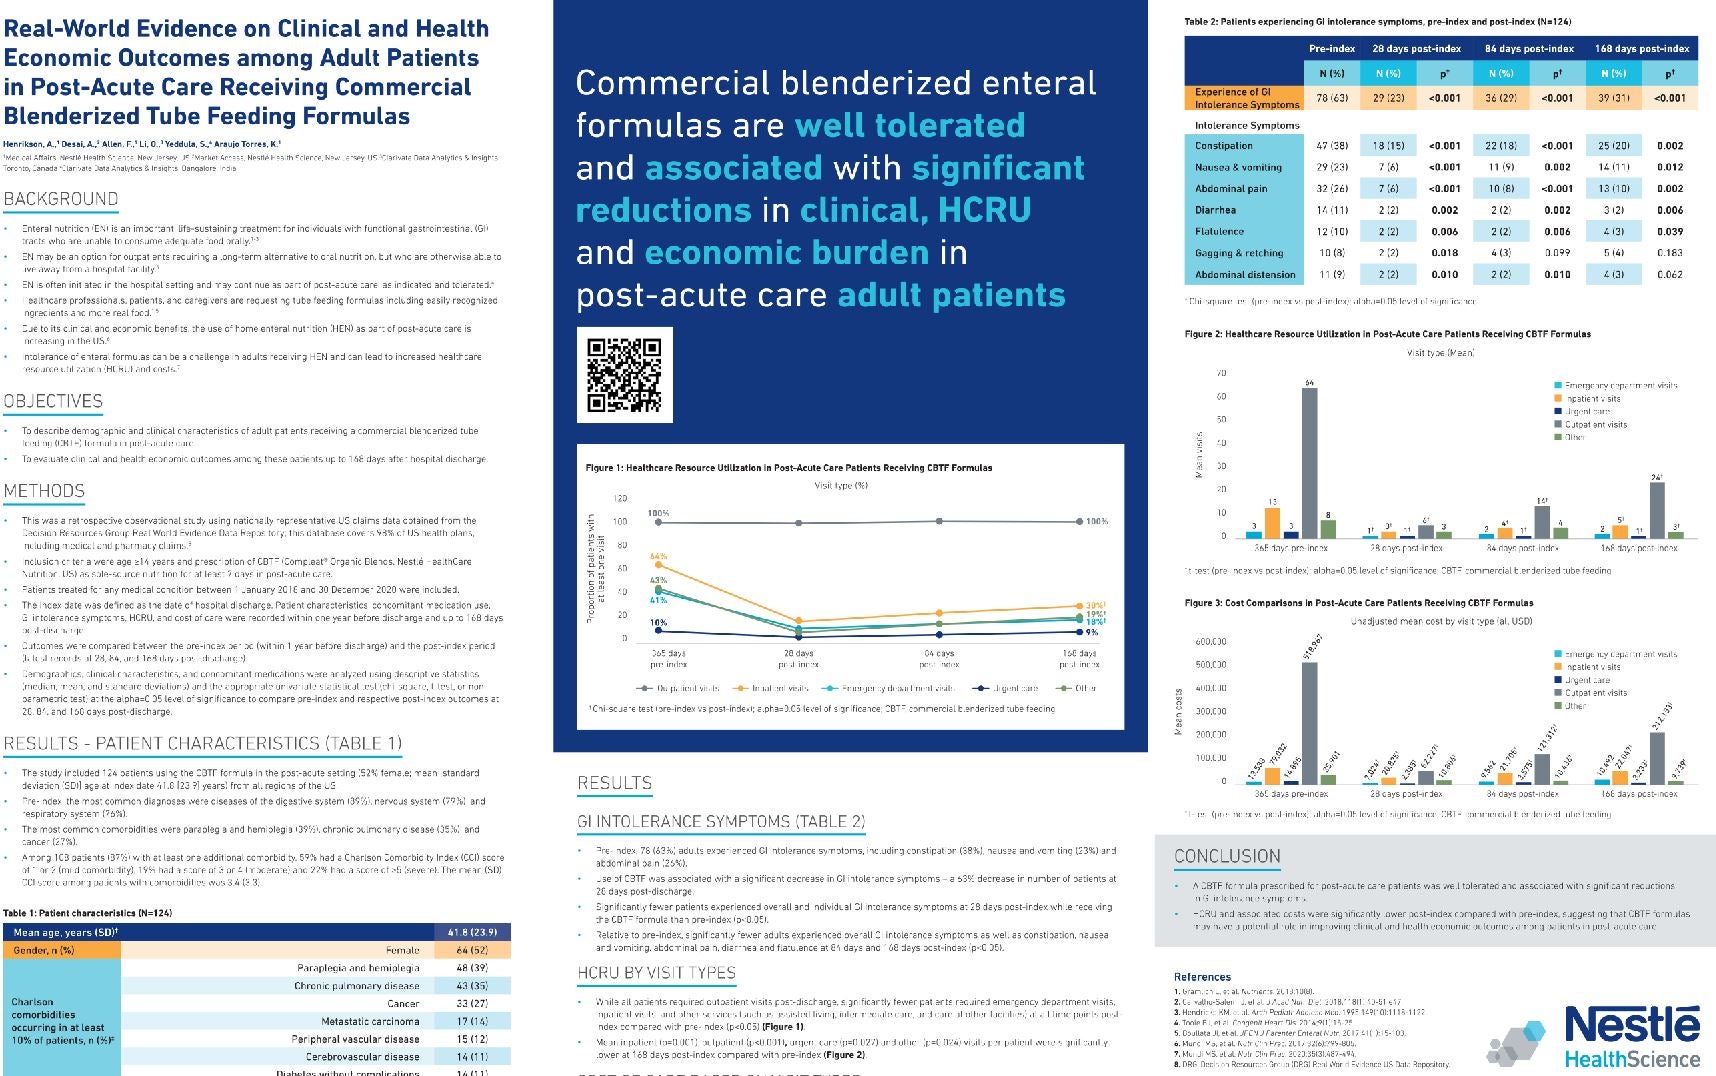 Poster: ASPEN 2022 Clinical & Health Economic Outcomes in Post-Acute Care Receiving Commercial BTF Formulas